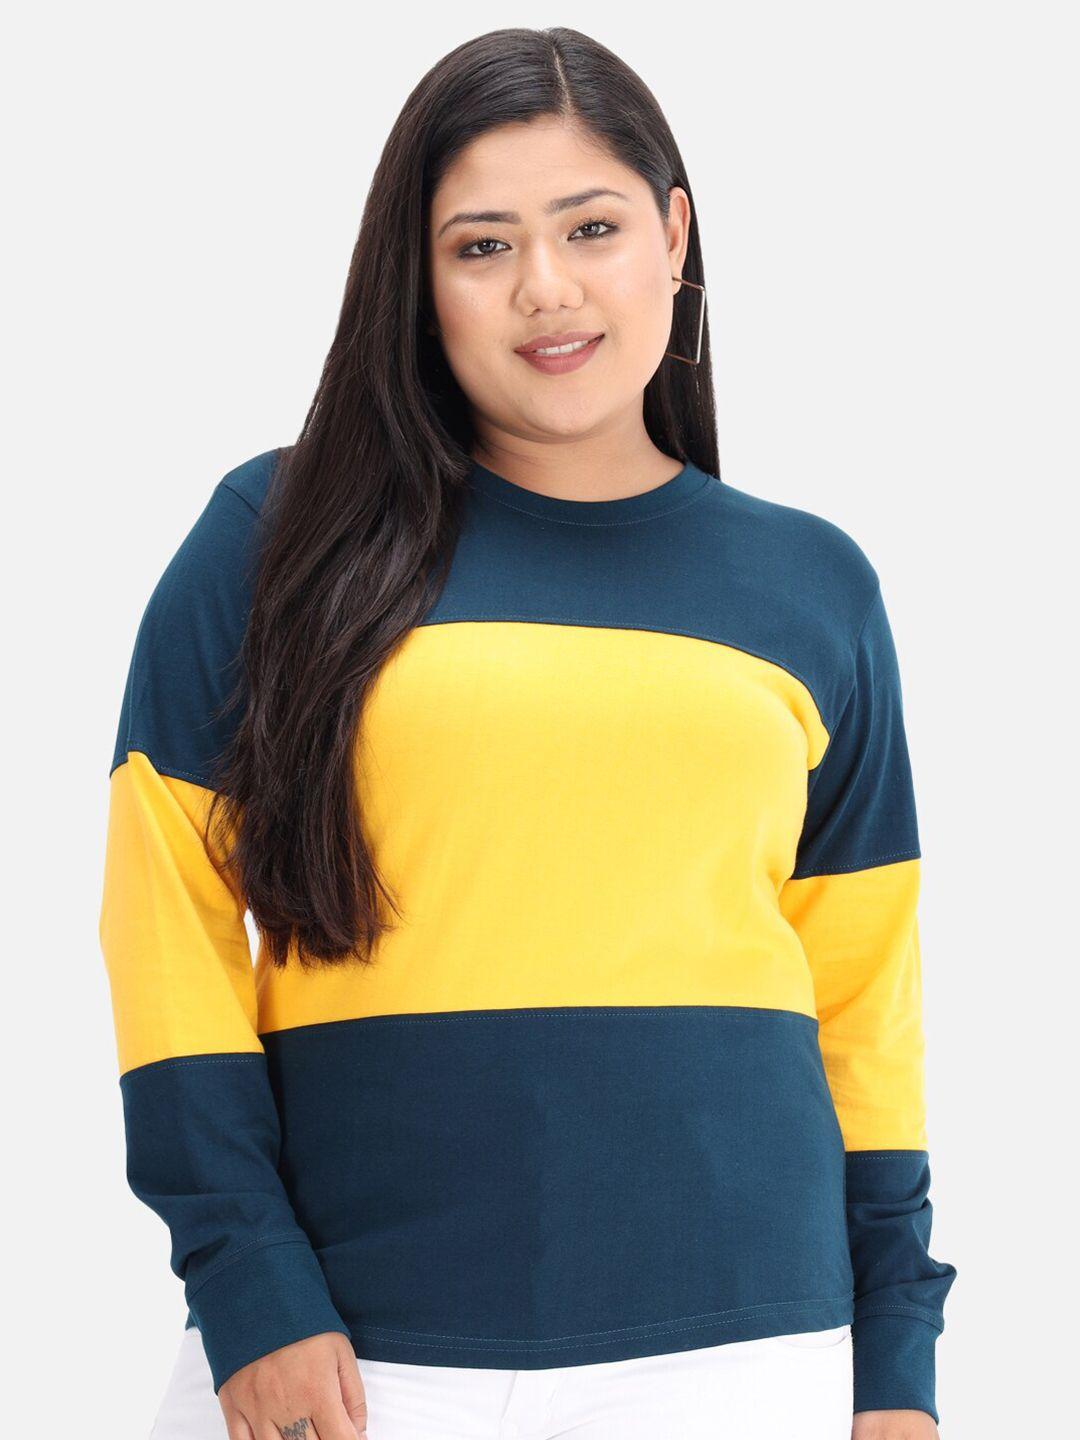 beyound-size---the-dry-state-women-teal-blue-&-yellow-colourblocked-t-shirt